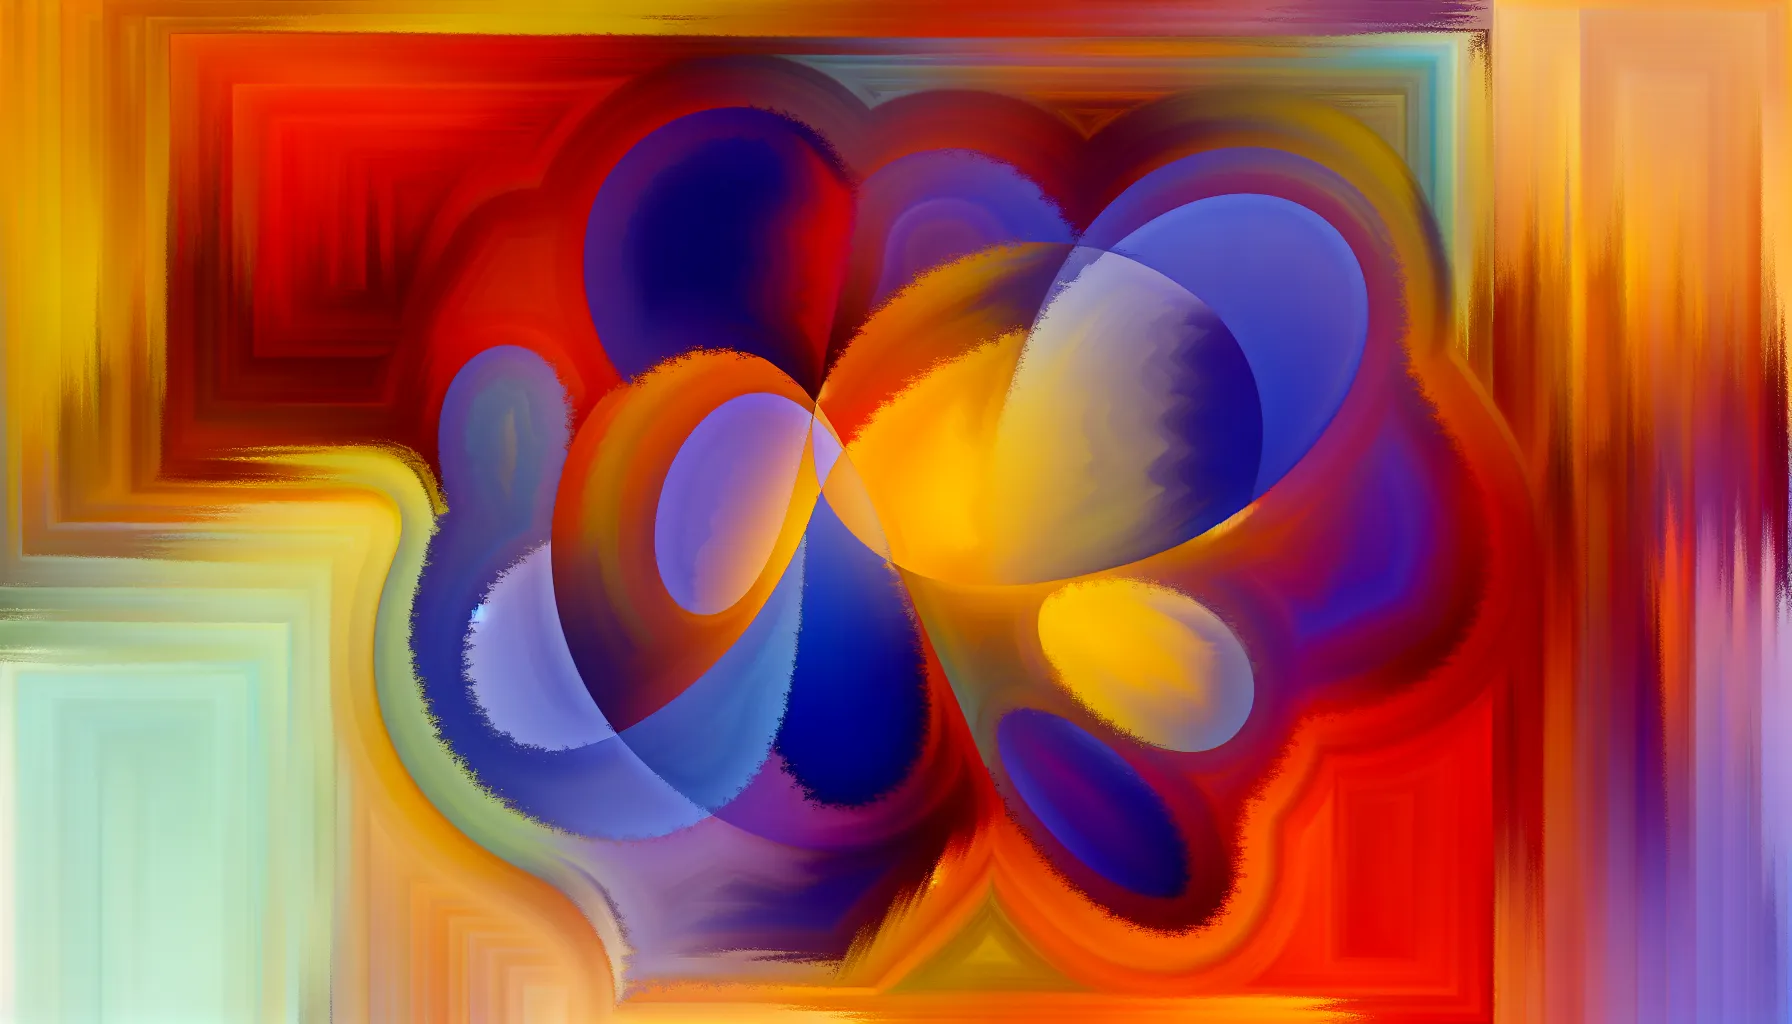 Abstract artistic image emphasizing complex relationships